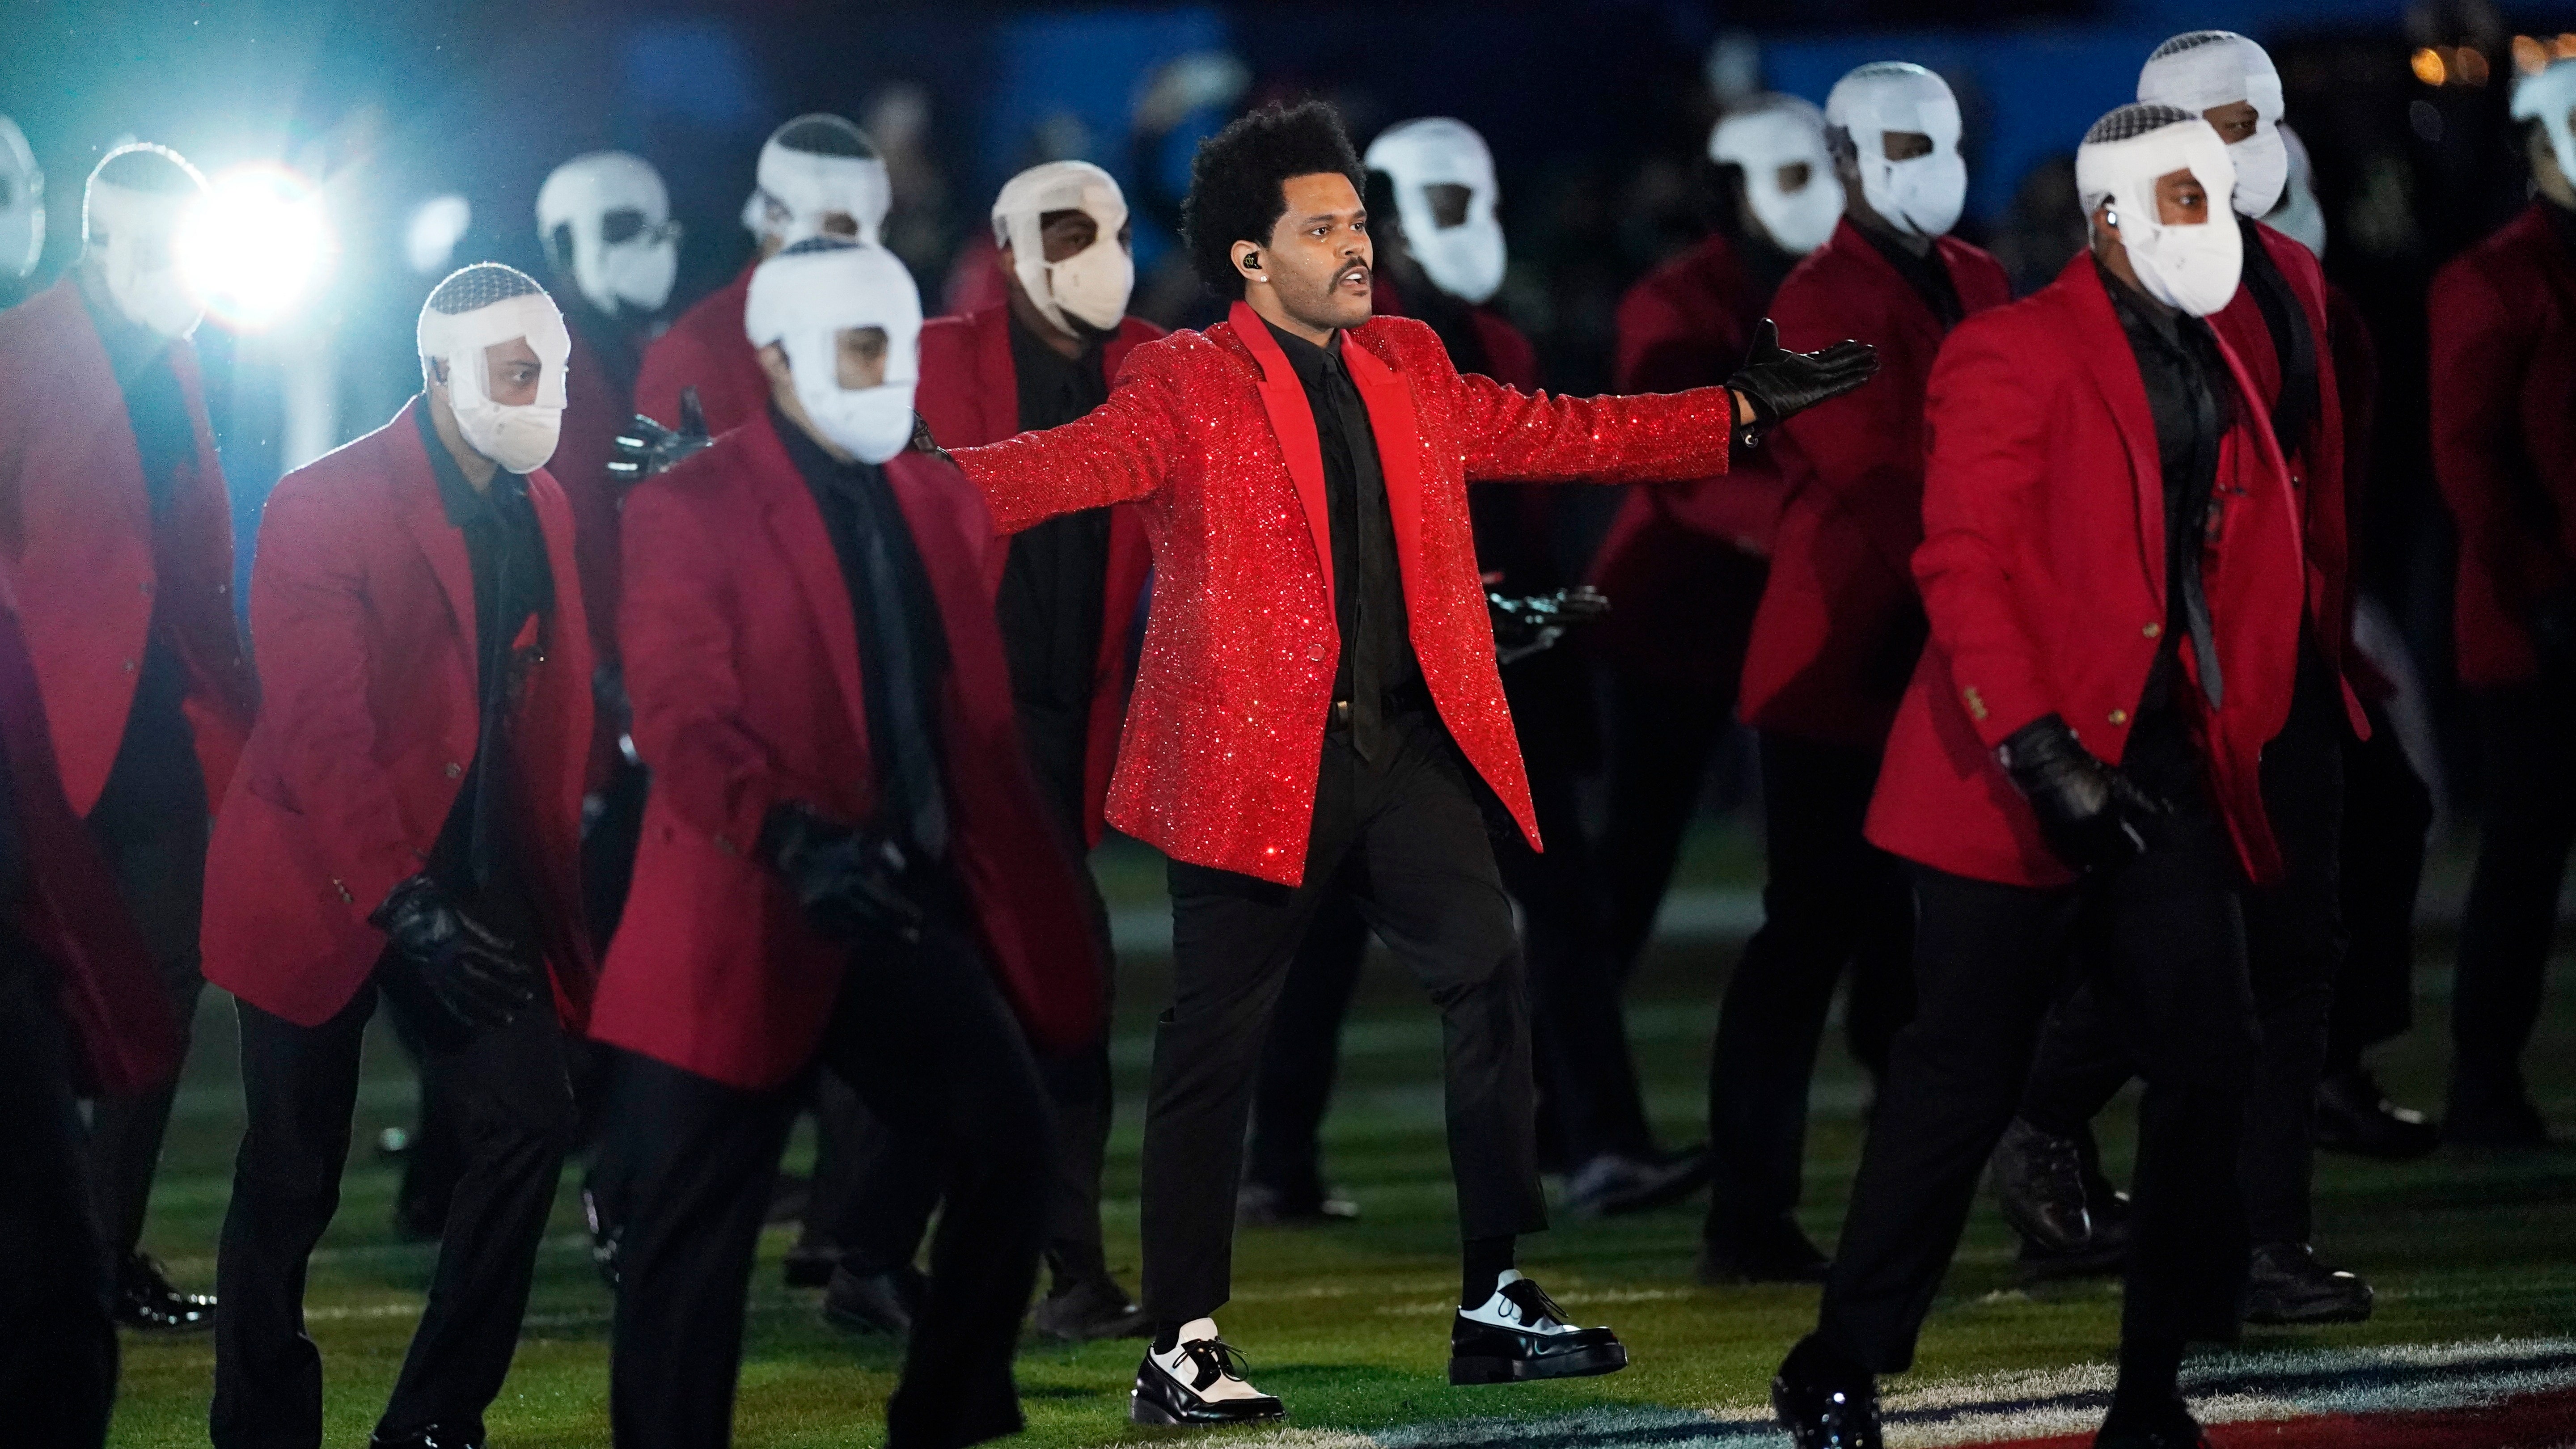 Super Bowl artist The Weeknd reveals why his dancers wore bandages